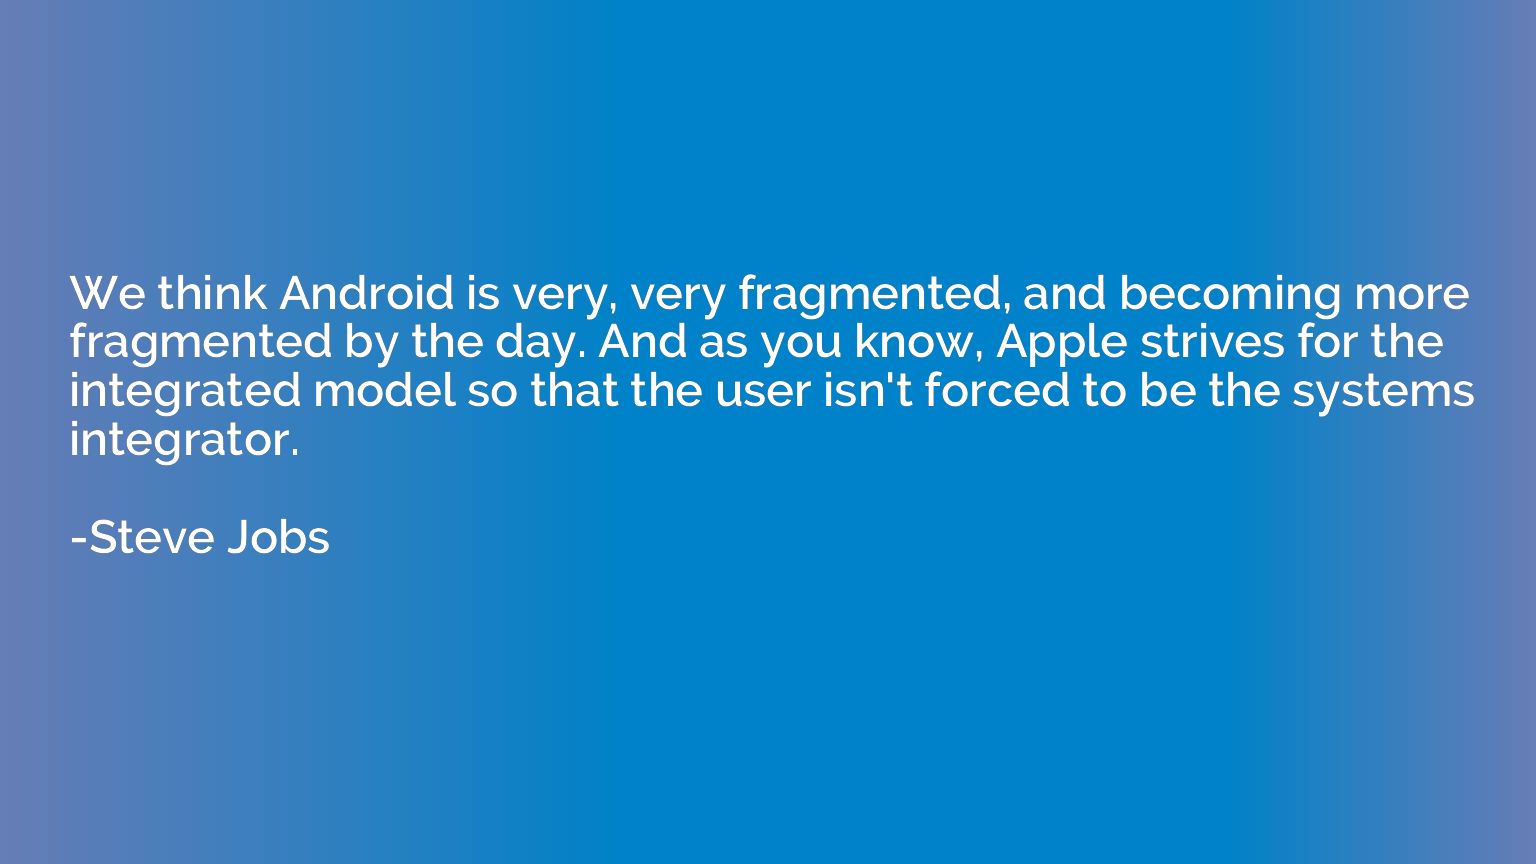 We think Android is very, very fragmented, and becoming more